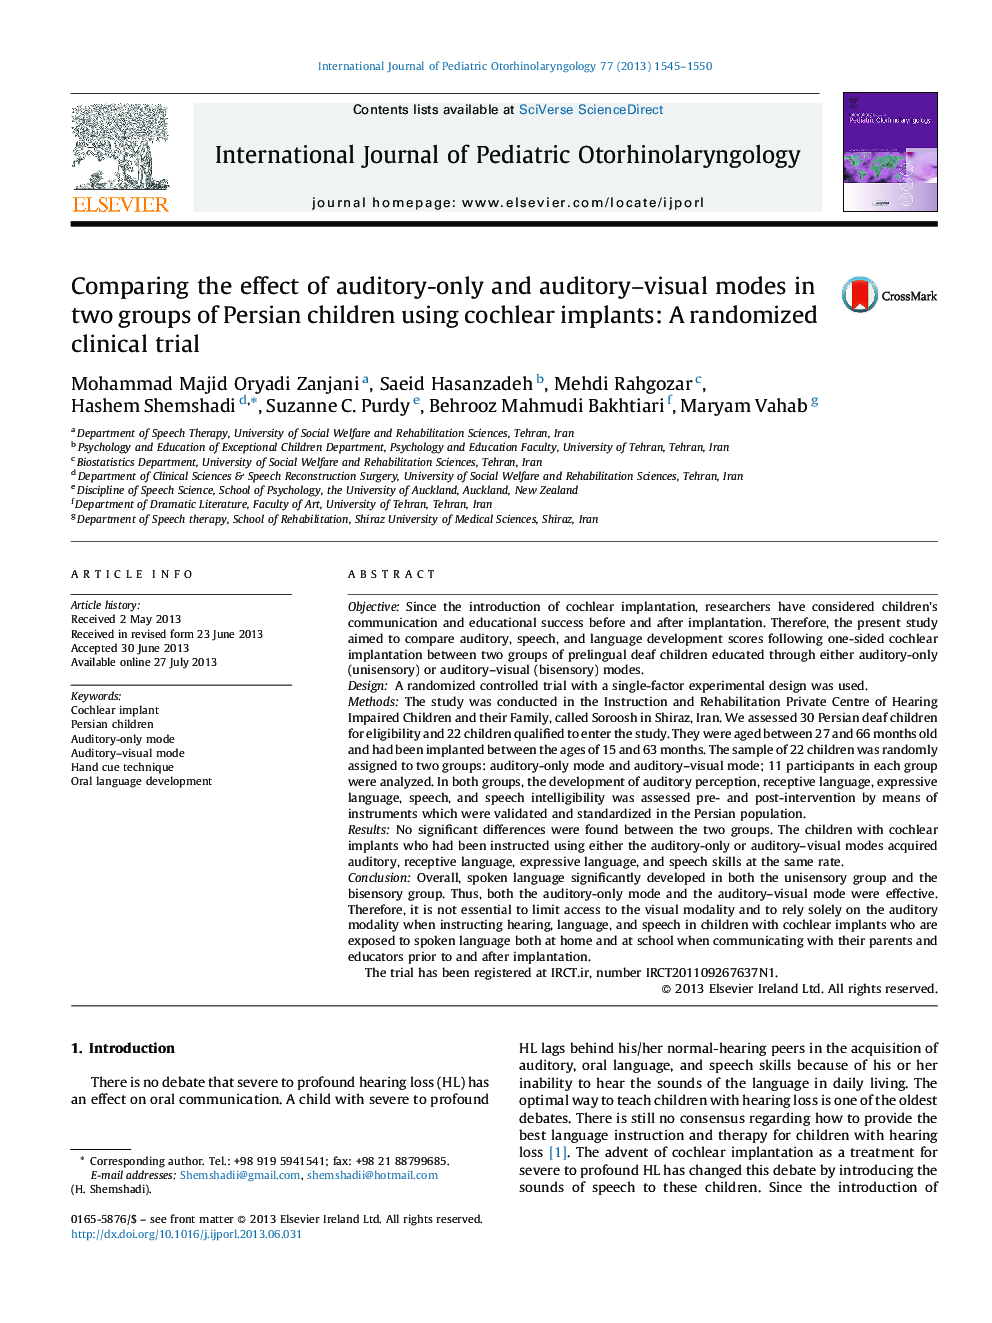 Comparing the effect of auditory-only and auditory-visual modes in two groups of Persian children using cochlear implants: A randomized clinical trial